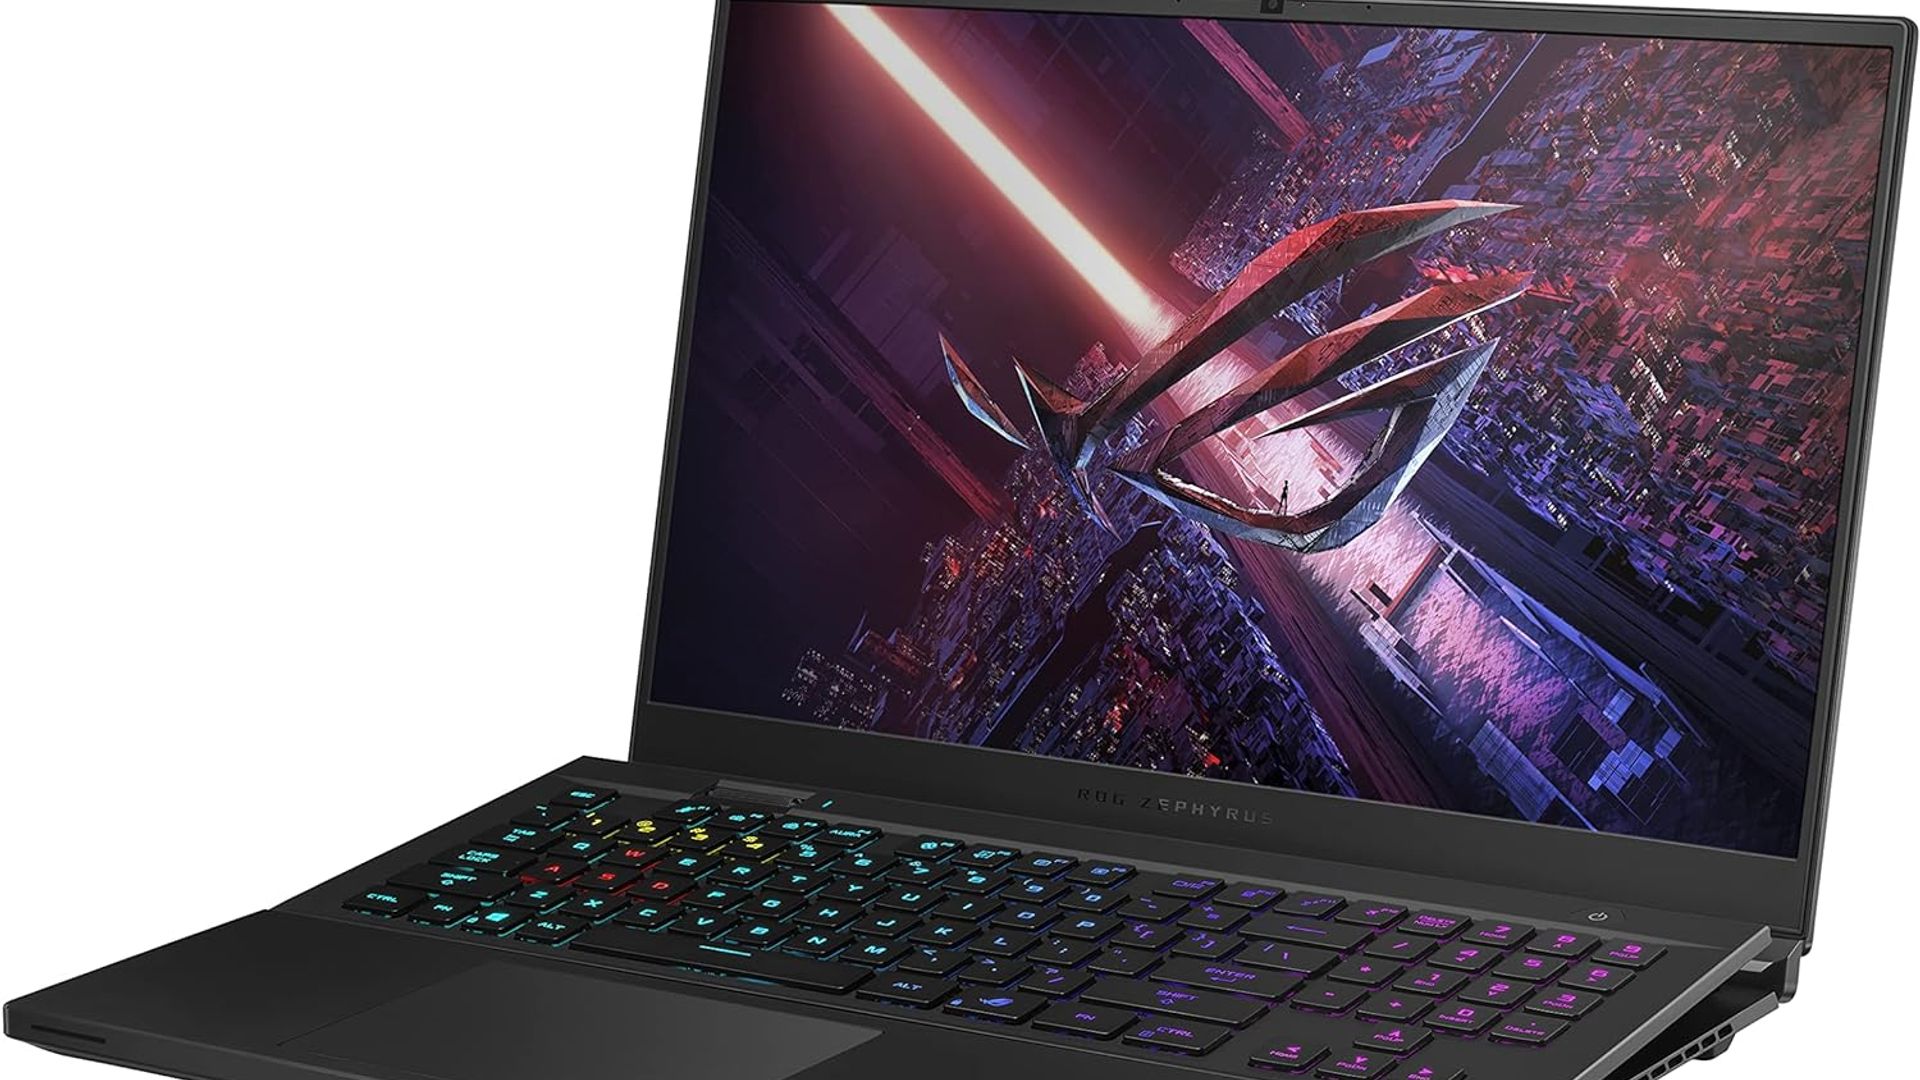 Review of the ASUS ROG Zephyrus S17